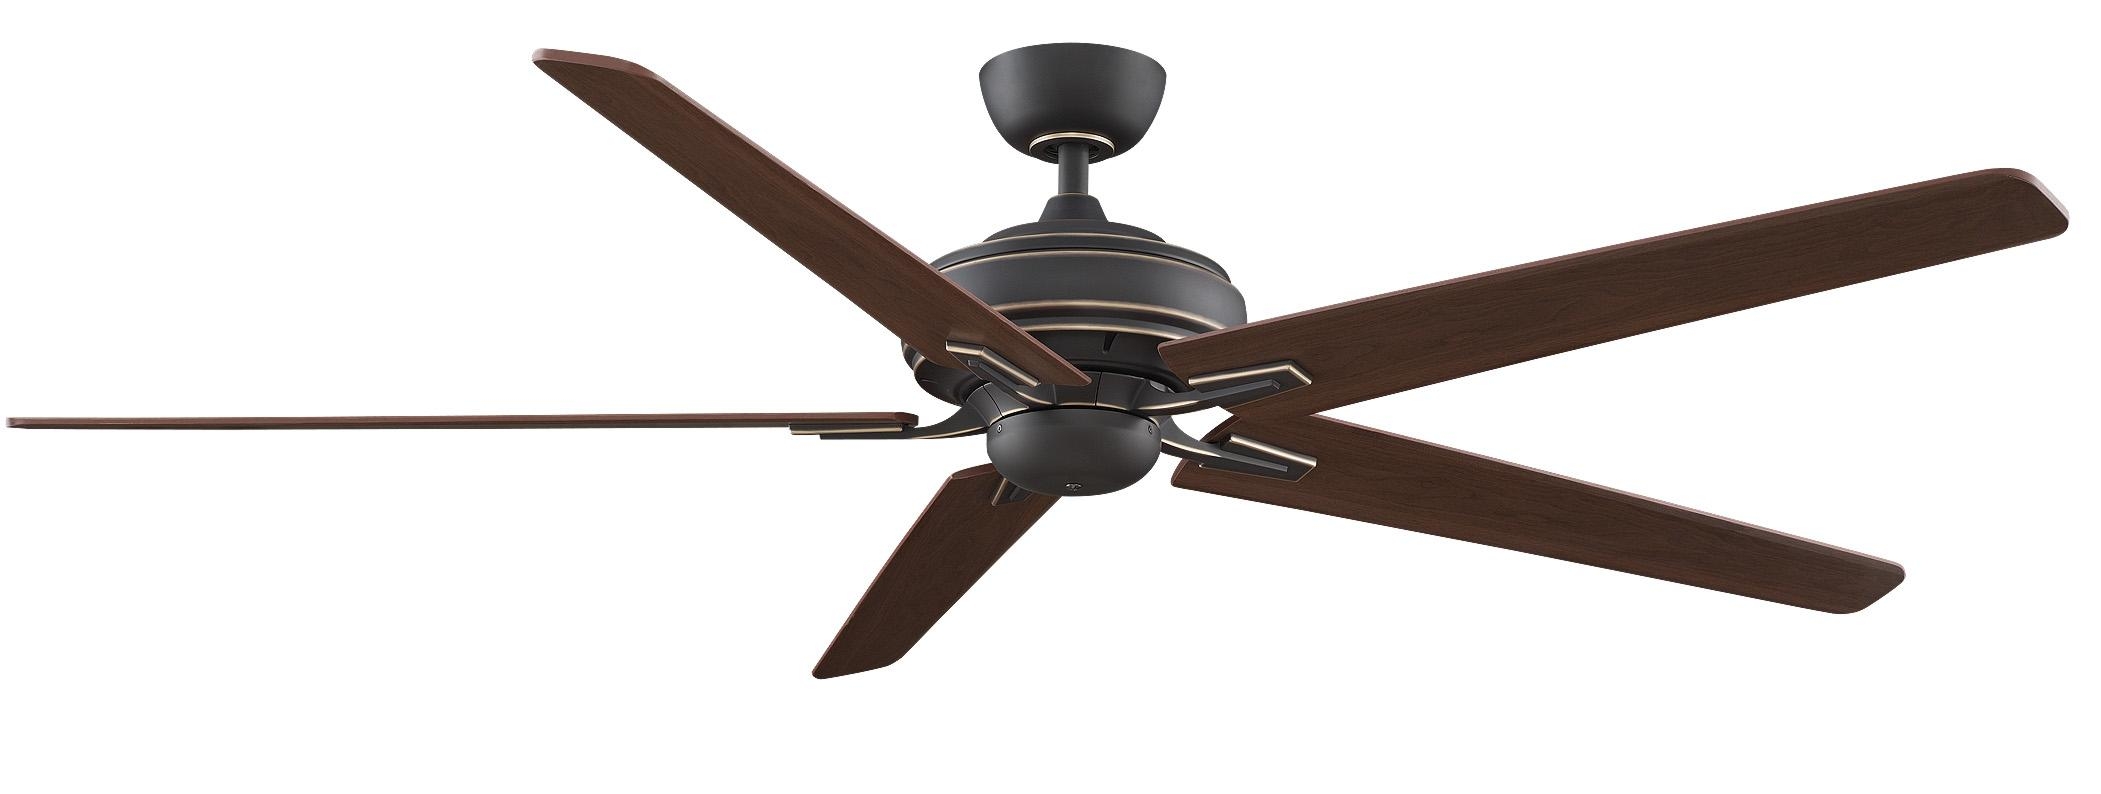 Permalink to 60 Ceiling Fans Without Lights